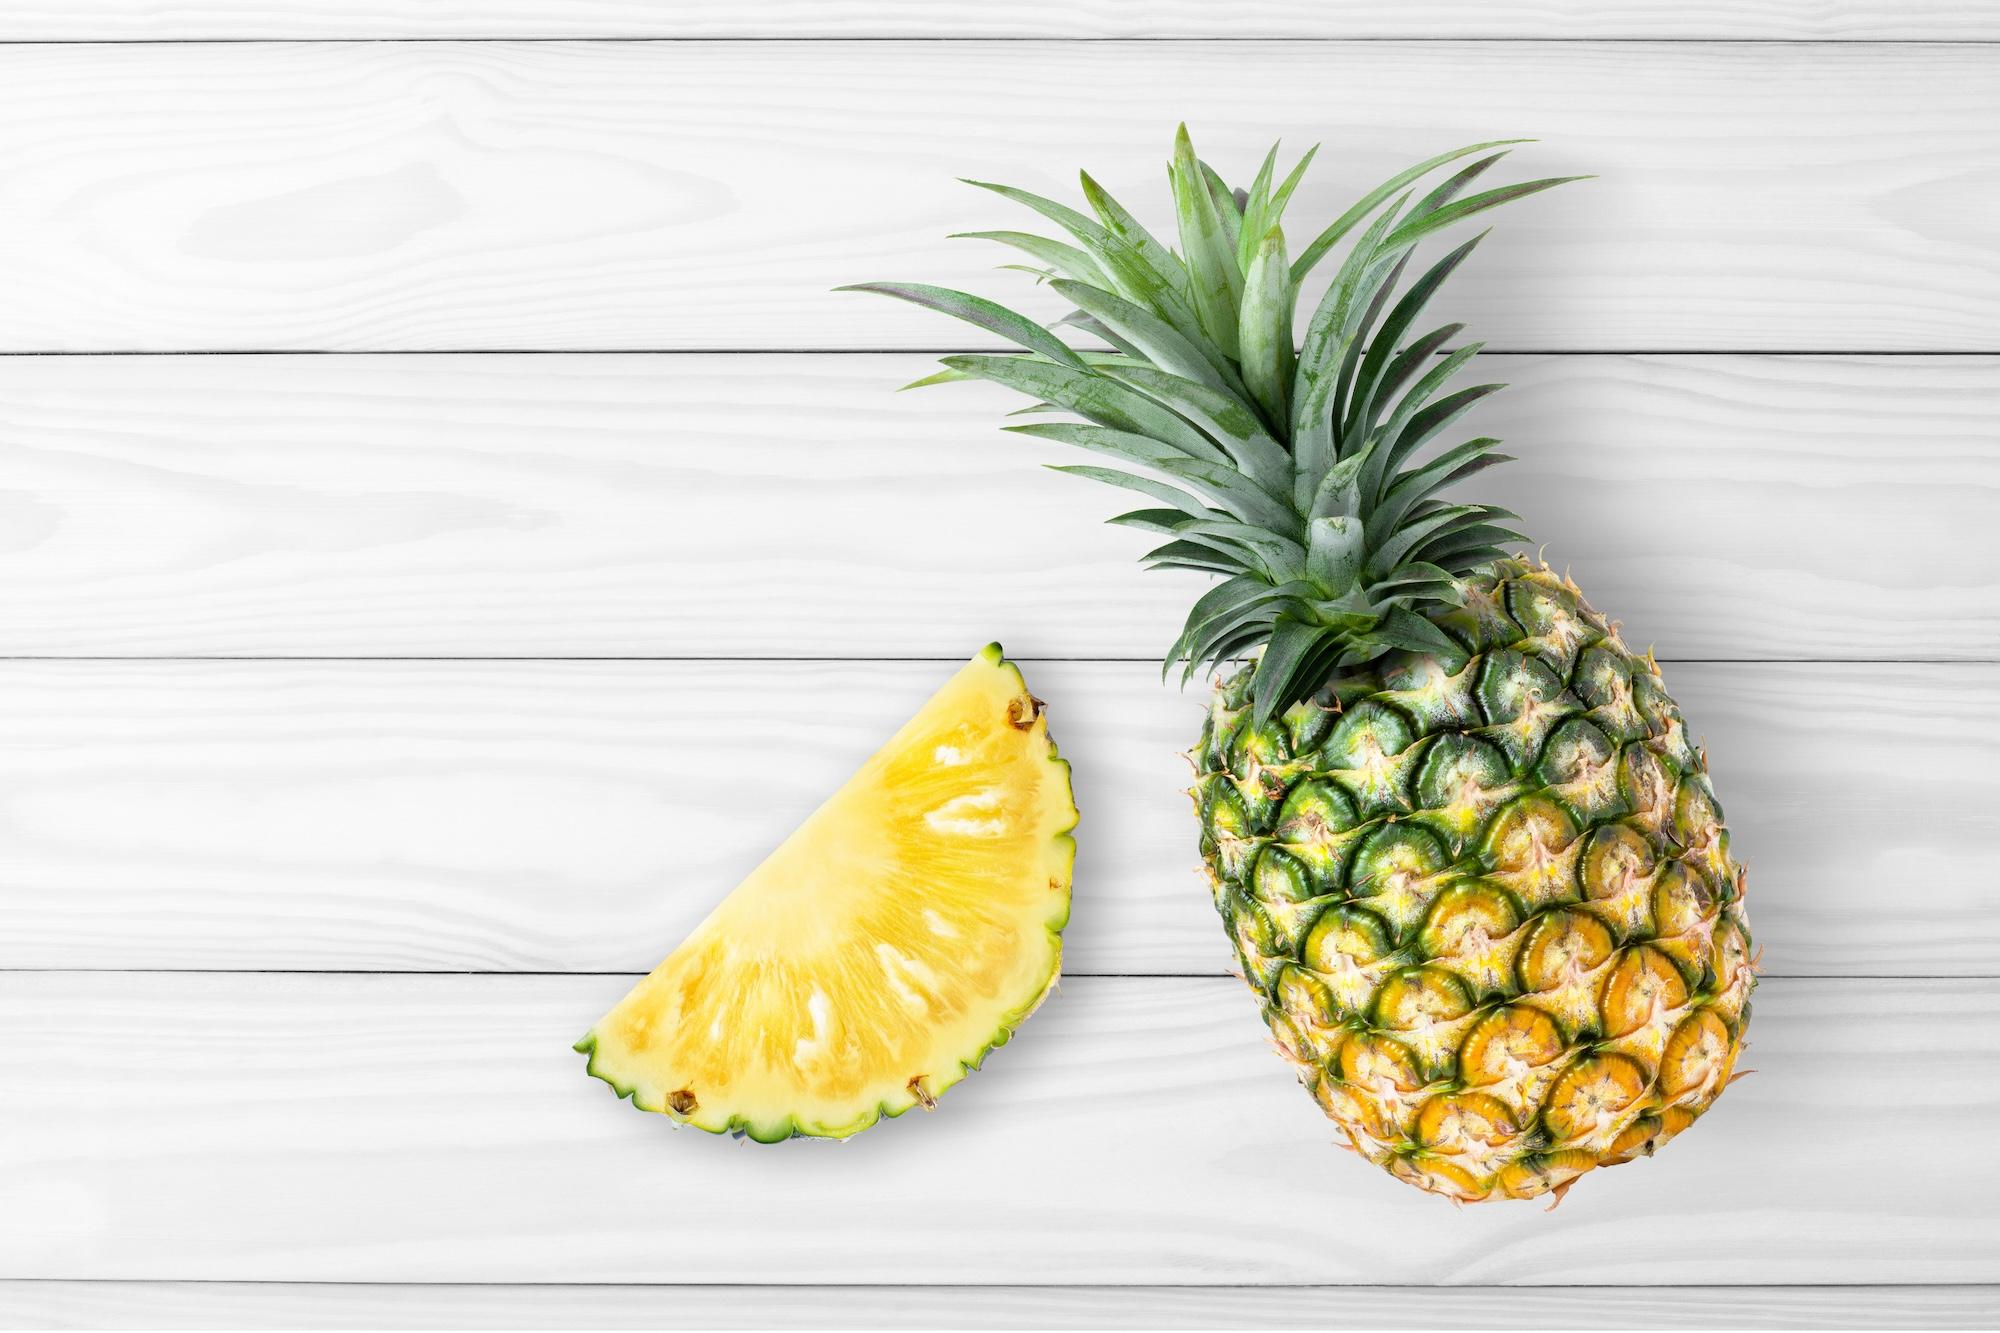 A whole pineapple and a slice of pineapple on wood table background